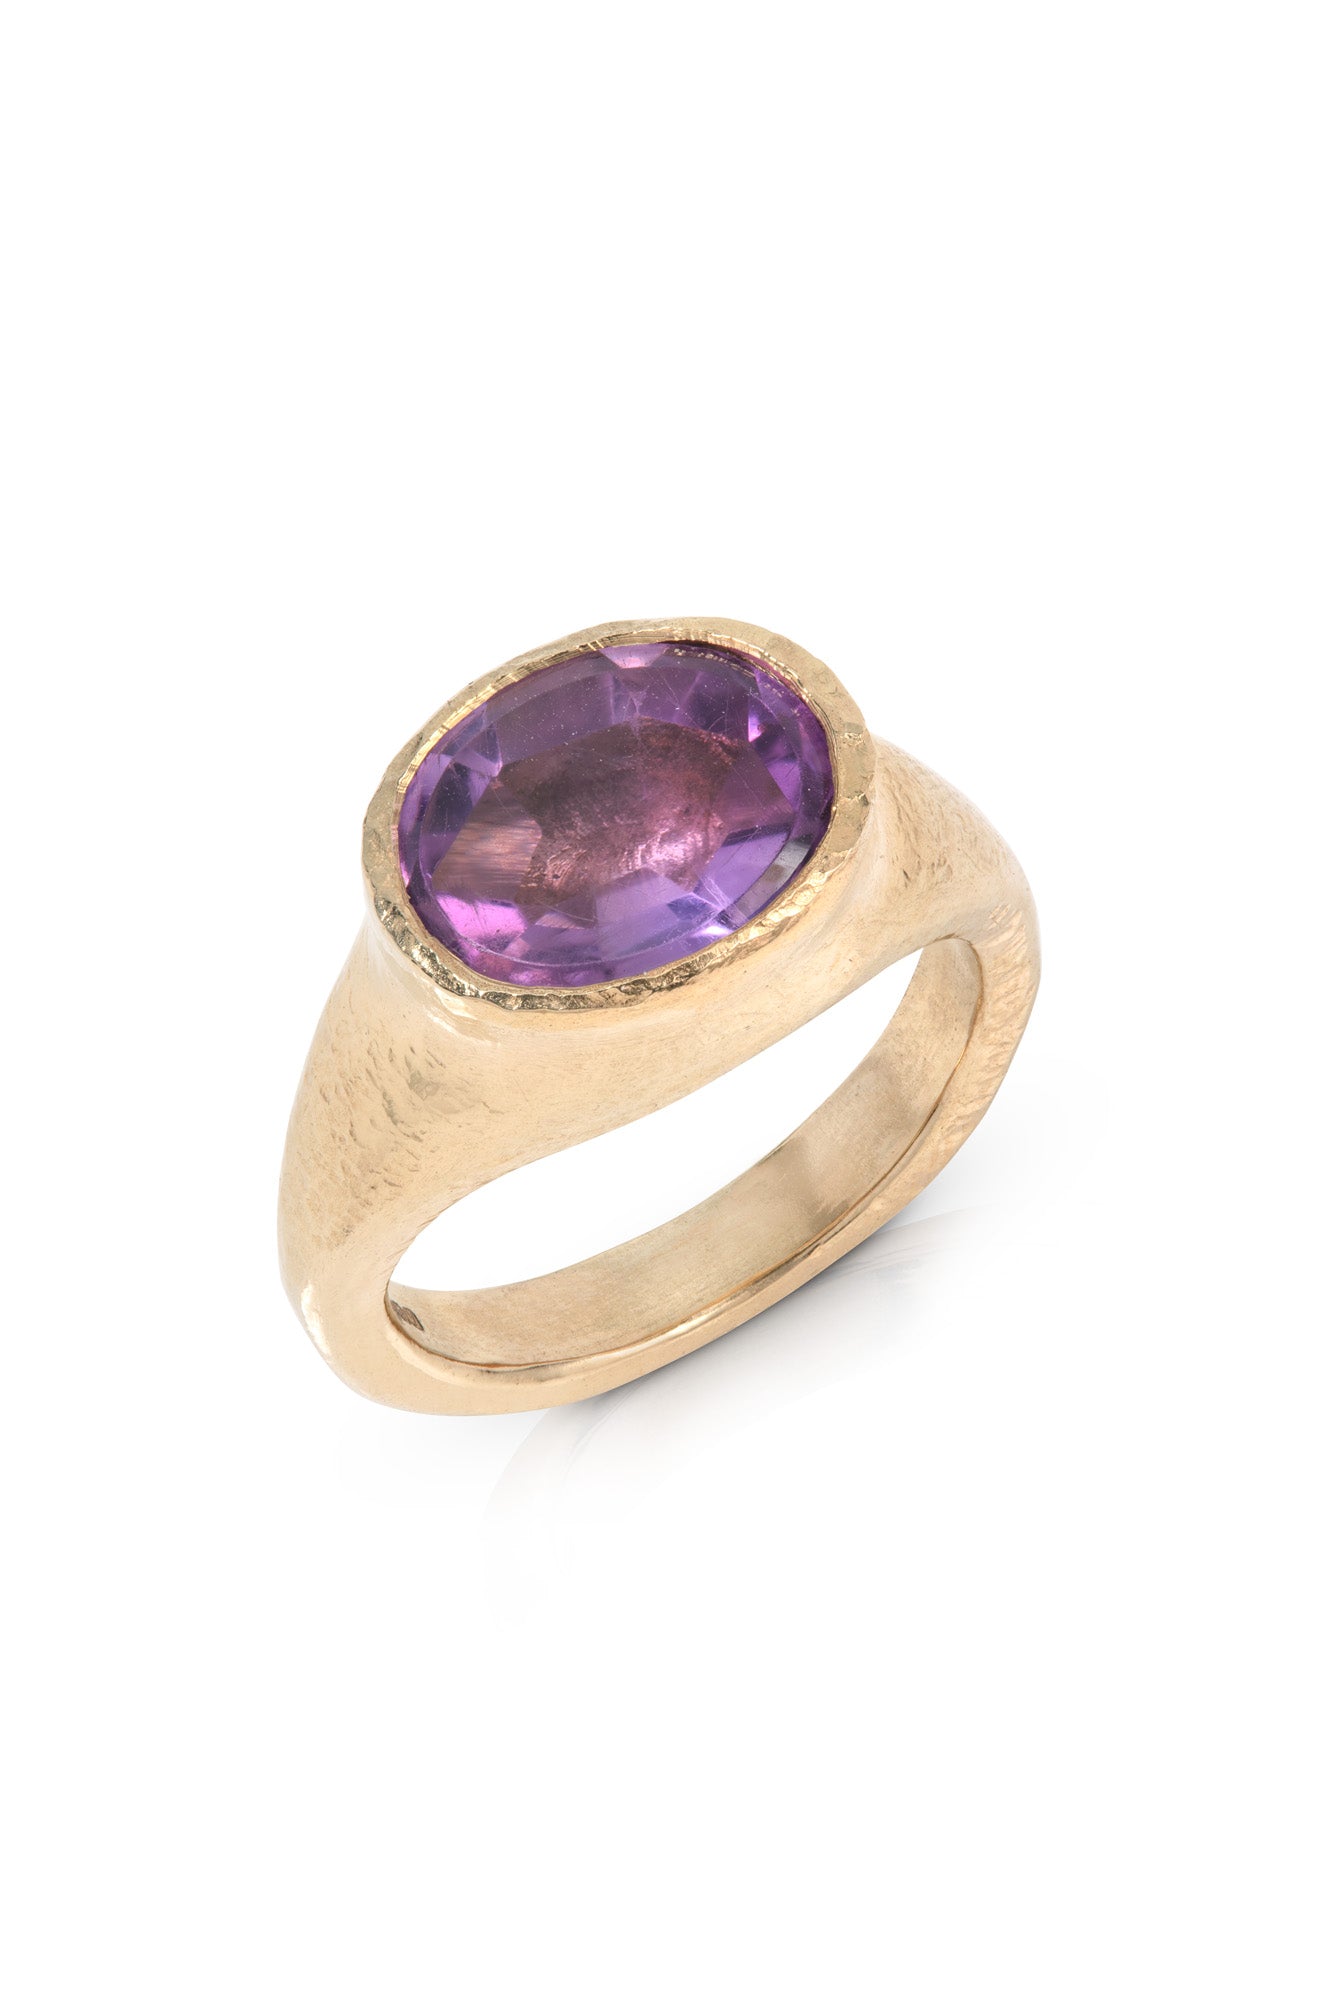 13 beautiful coloured stone engagement rings that we adore